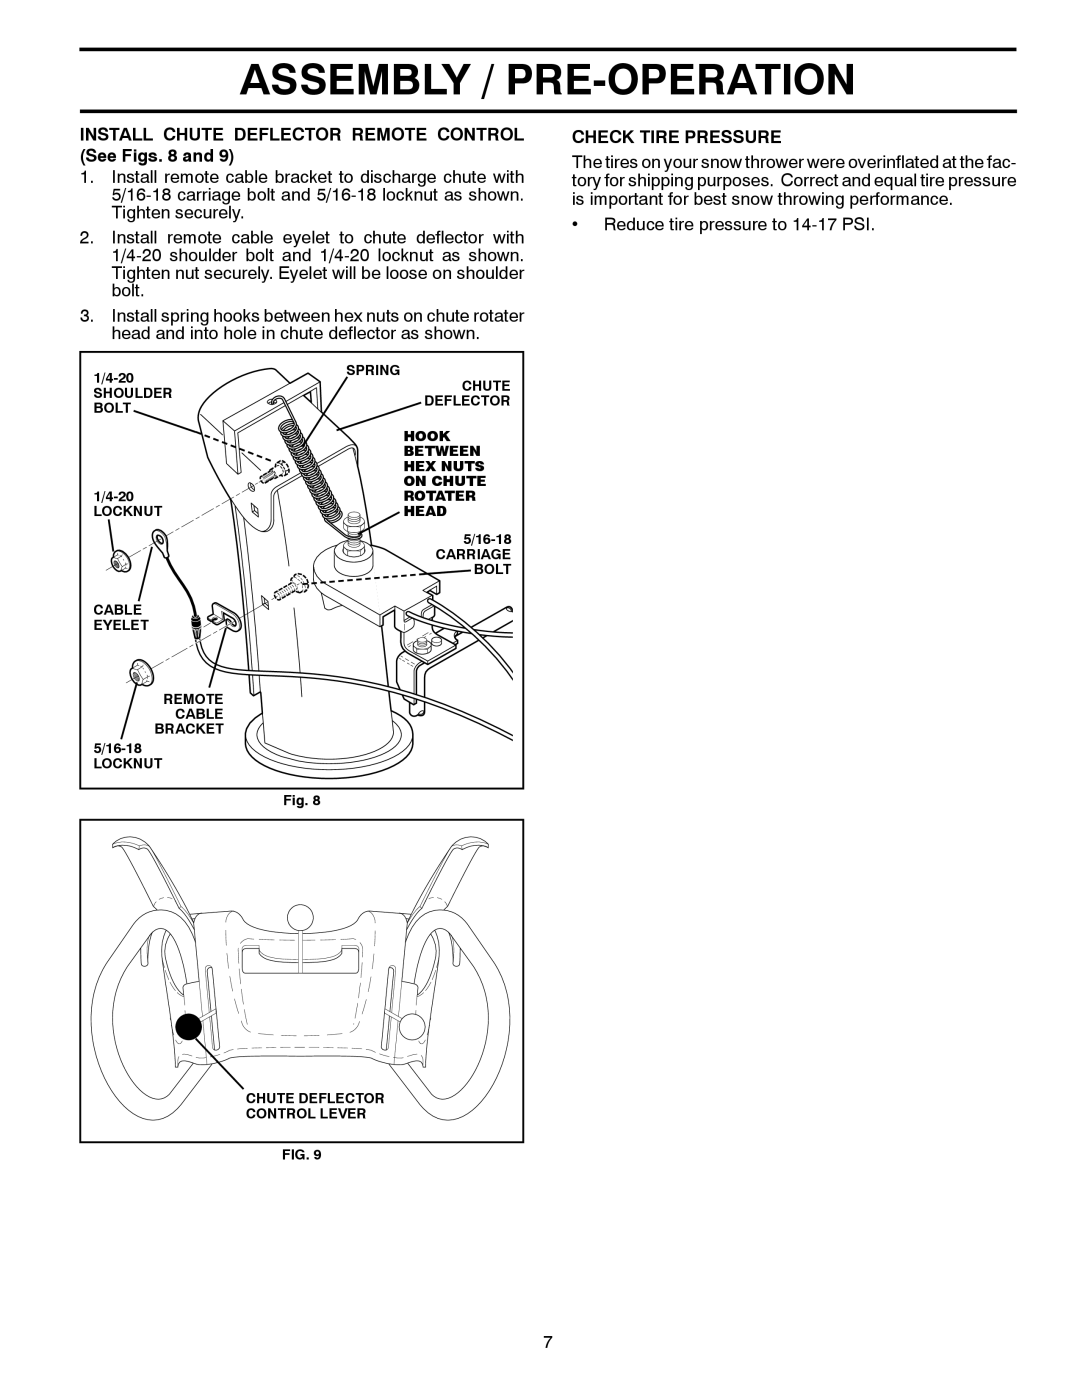 Poulan 96192003201 Assembly / Pre-Operation, INSTALL CHUTE DEFLECTOR REMOTE CONTROL See Figs. 8 and, Check Tire Pressure 